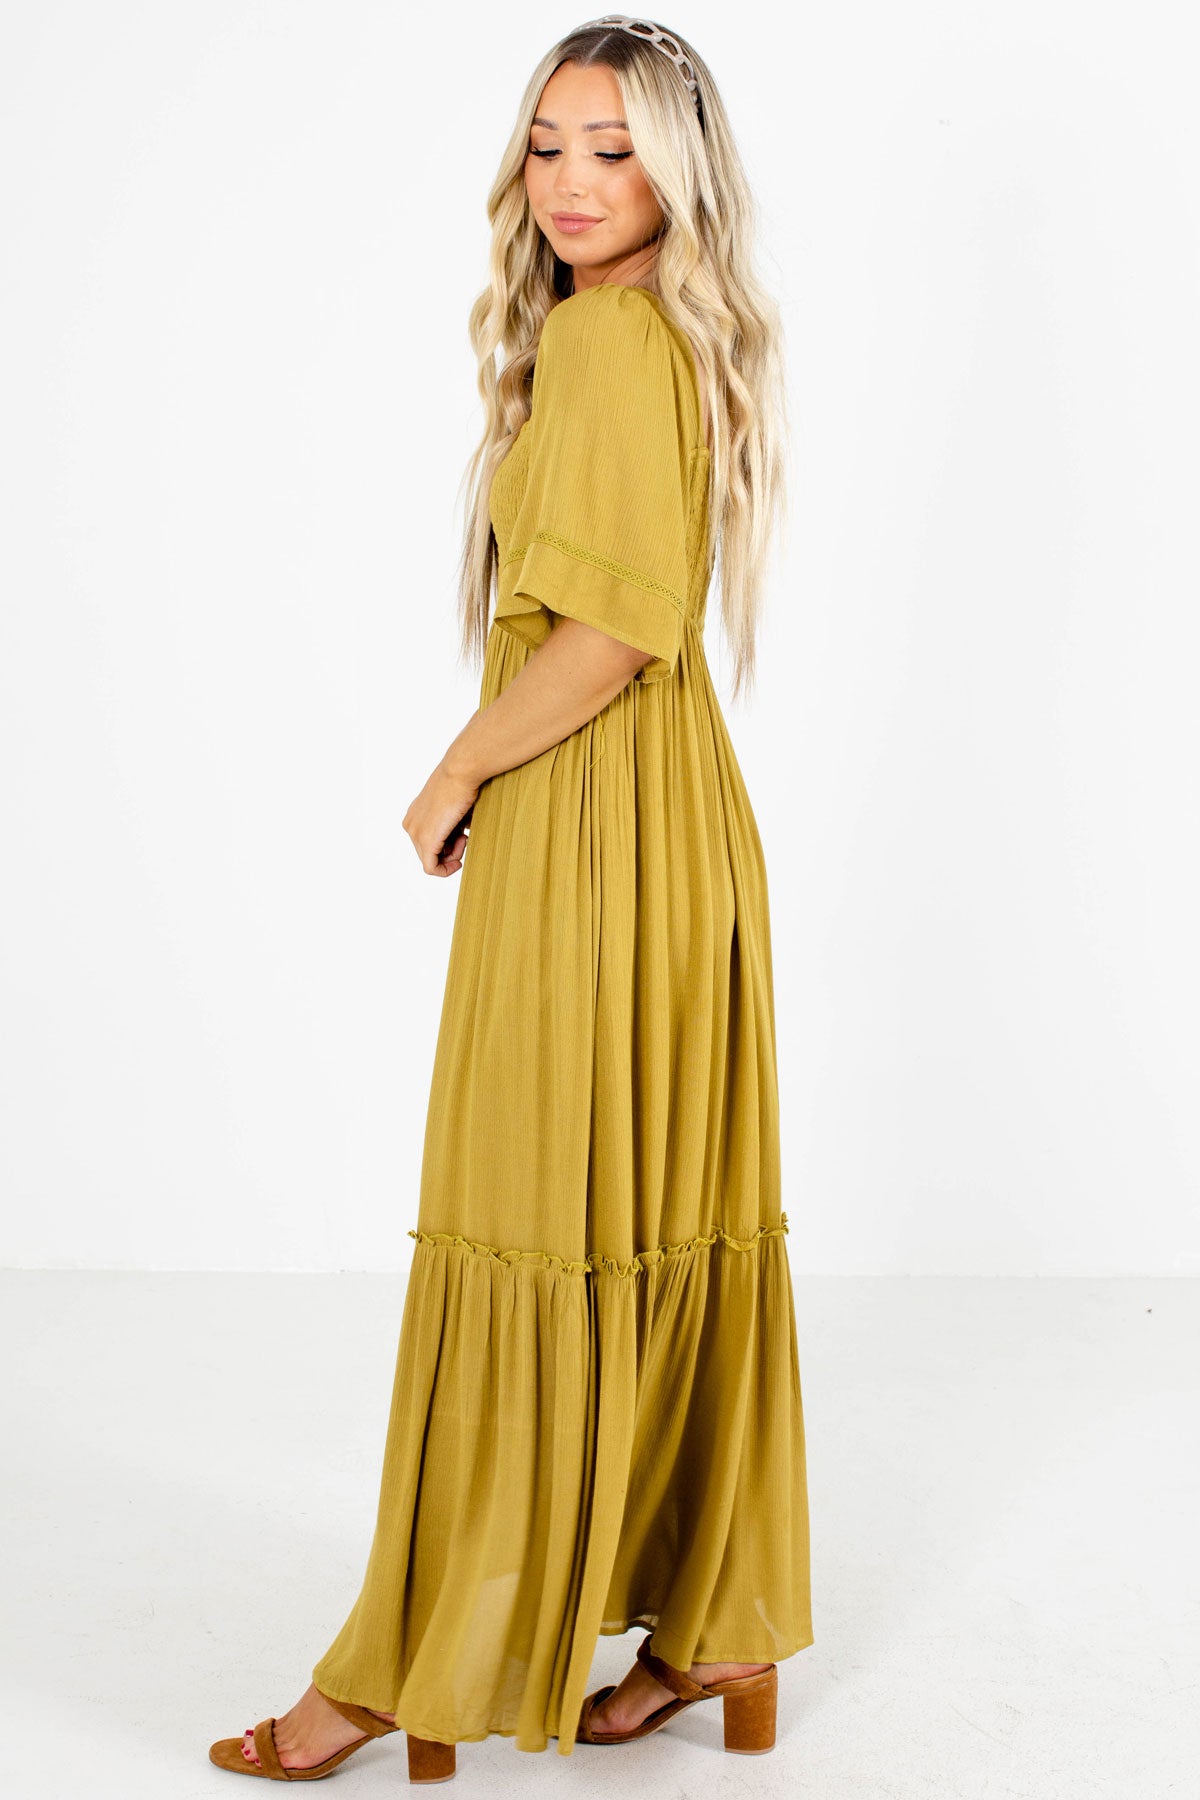 Stretchy Comfortable Maxi Dress Boutique Styles